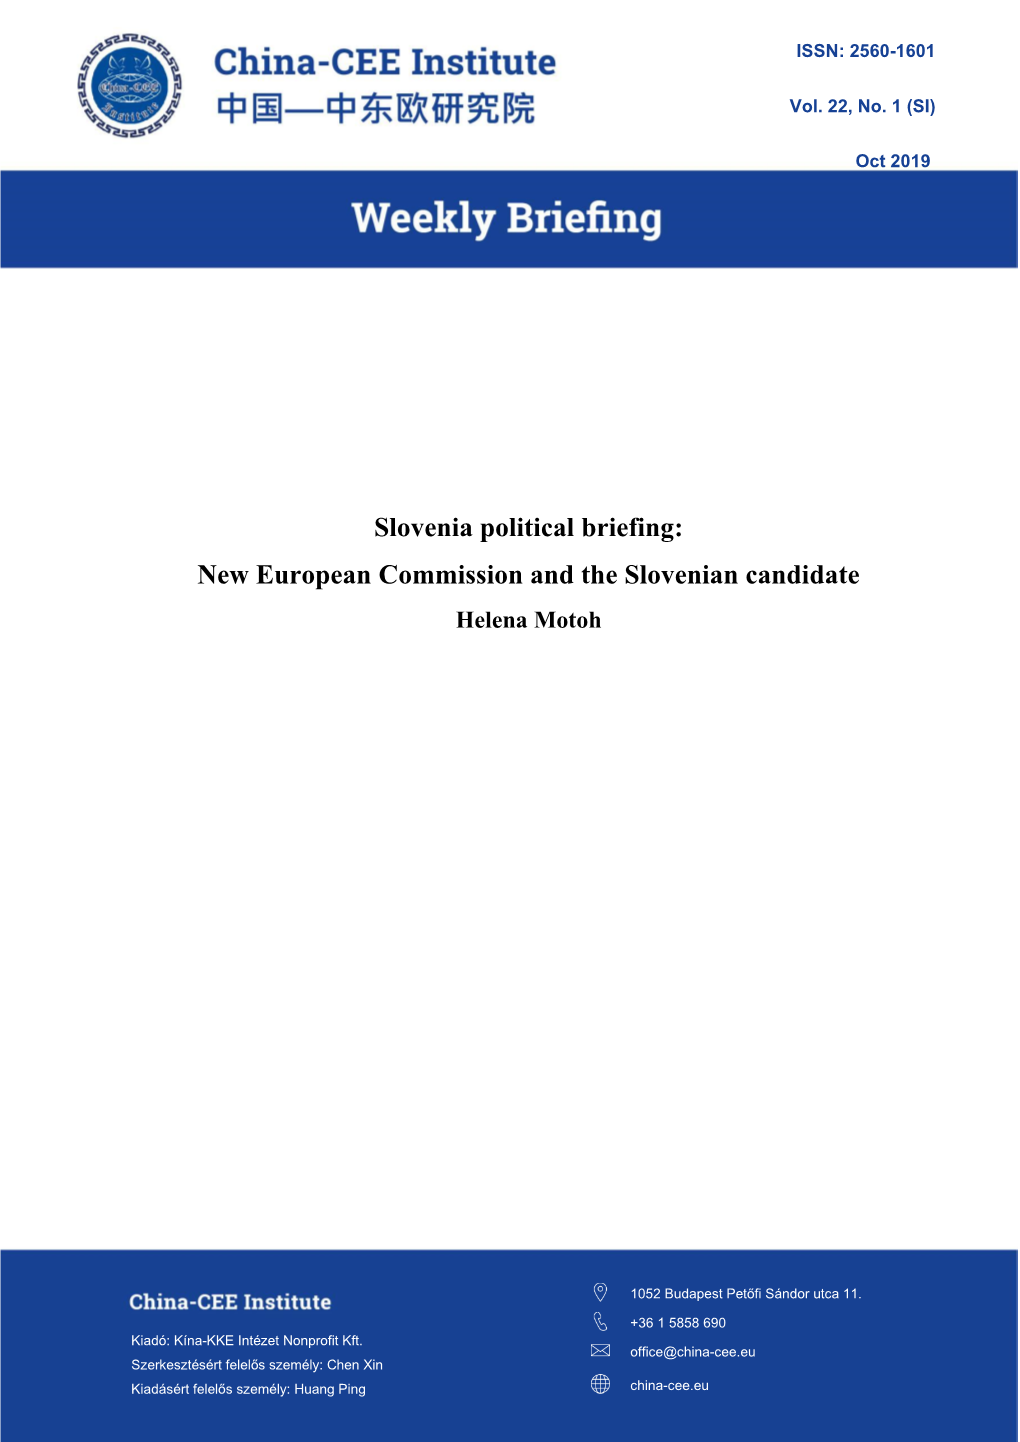 Slovenia Political Briefing: New European Commission and the Slovenian Candidate Helena Motoh